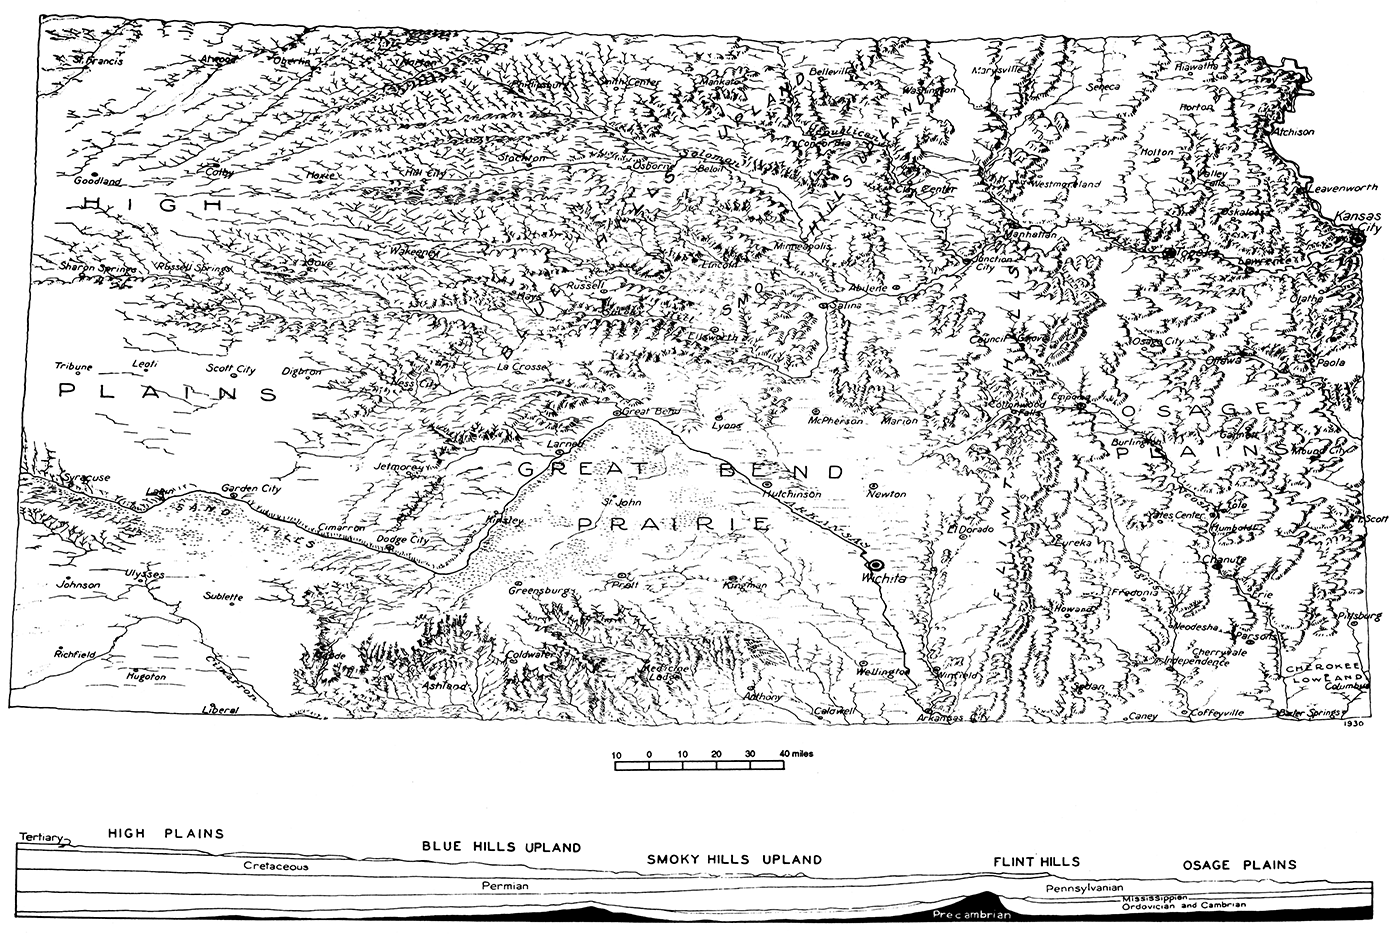 Surface Features of Kansas; sketch of the hills, plains, and rivers of Kansas.